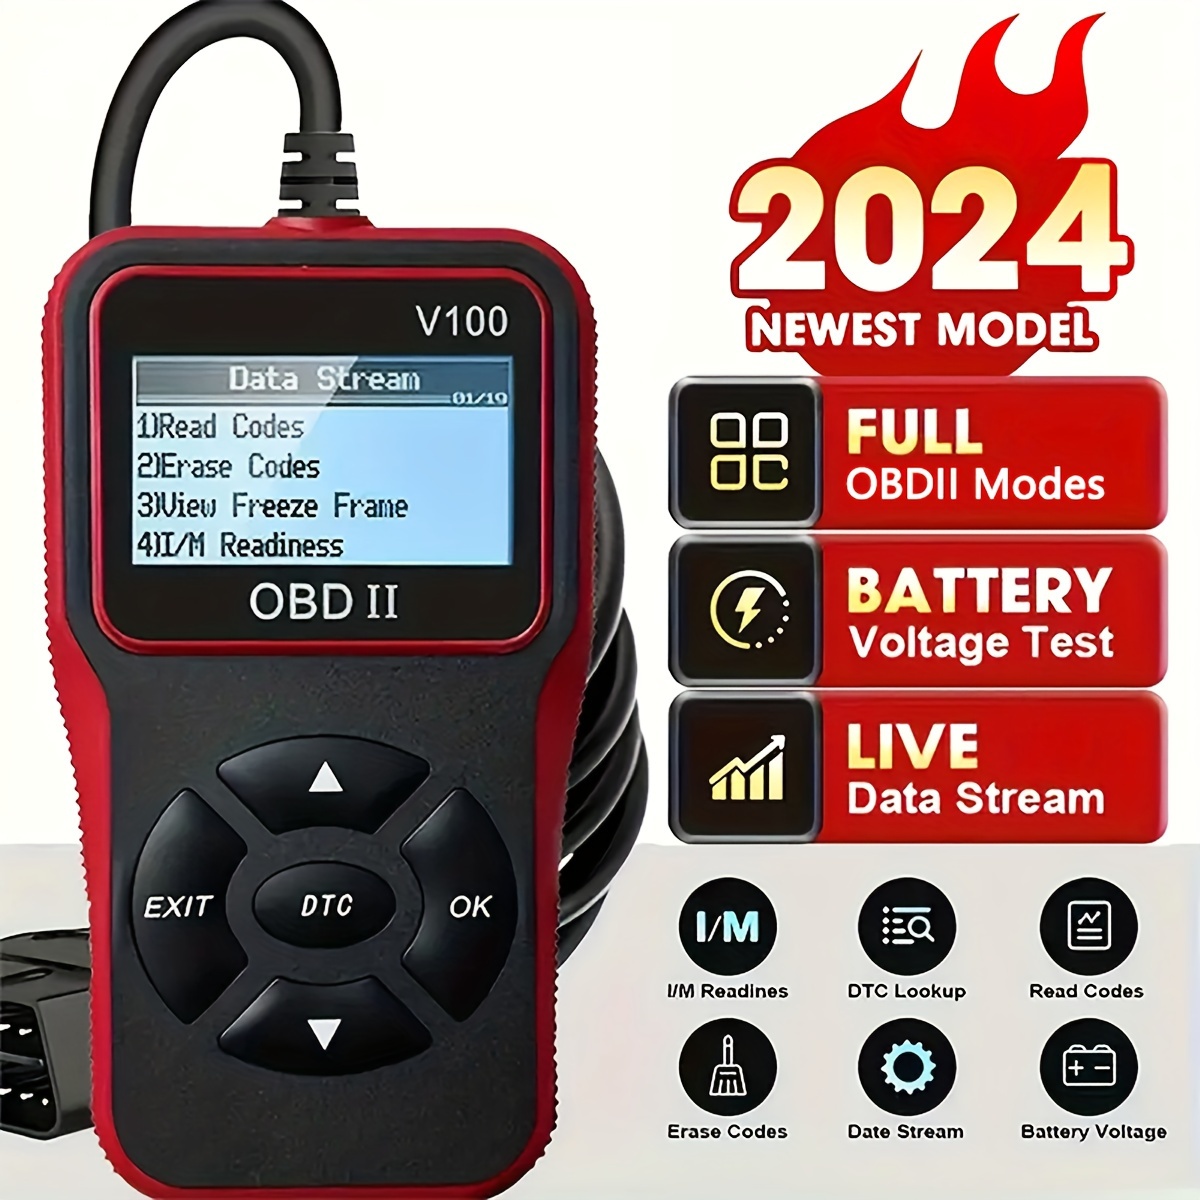 

Automotive Obd2 Diagnose Scanner Code Reader Engine Fault Code Reader Scanner Can Diagnose Scan Tool For All Obd Ii Protocol Cars Since 1996, I/m Readiness, Battery Test, Read Code Erase Code Etc.